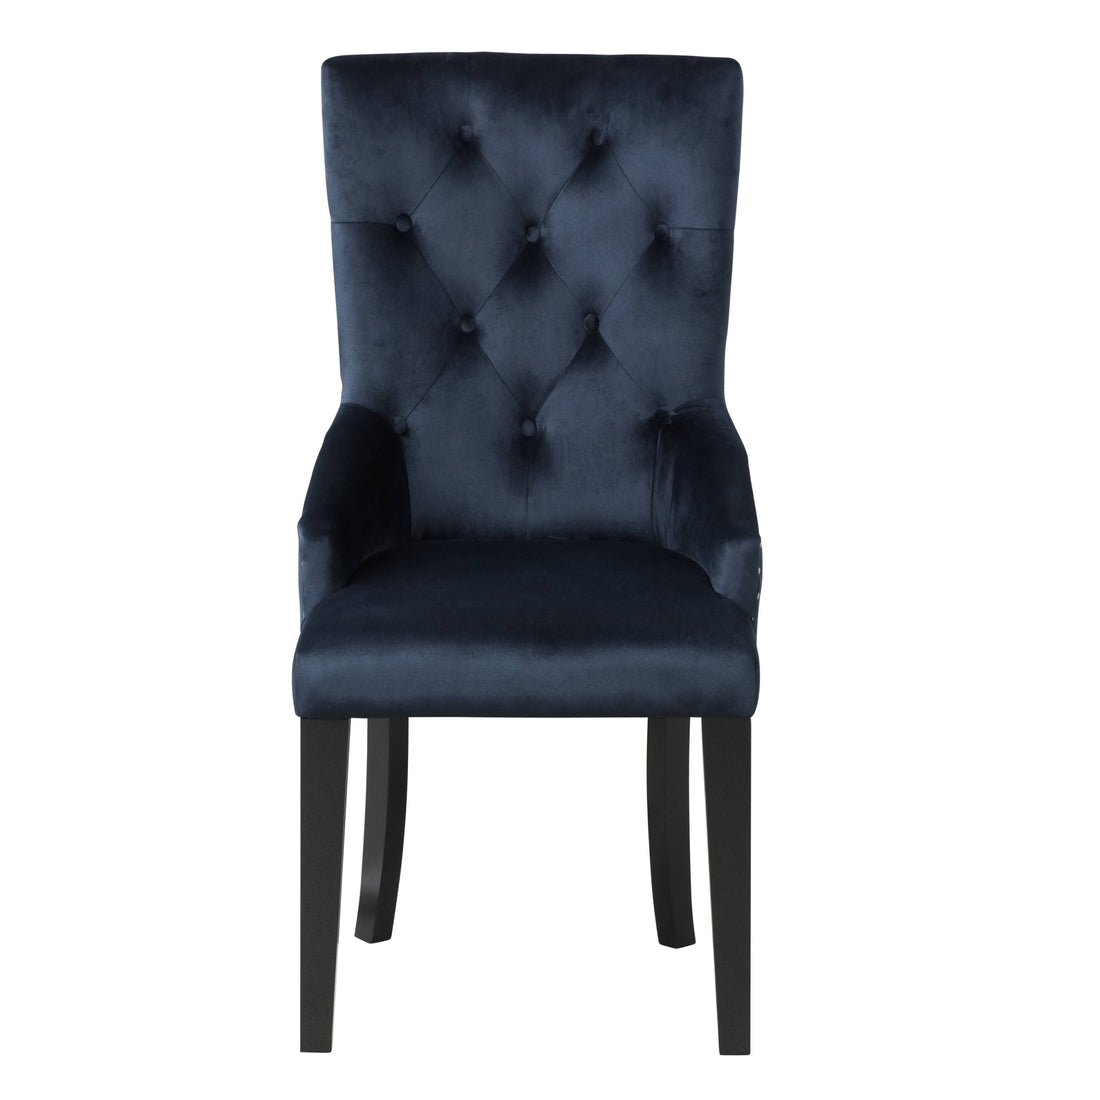 Dark Navy And Black Tufted Back Arm Chair - Solid